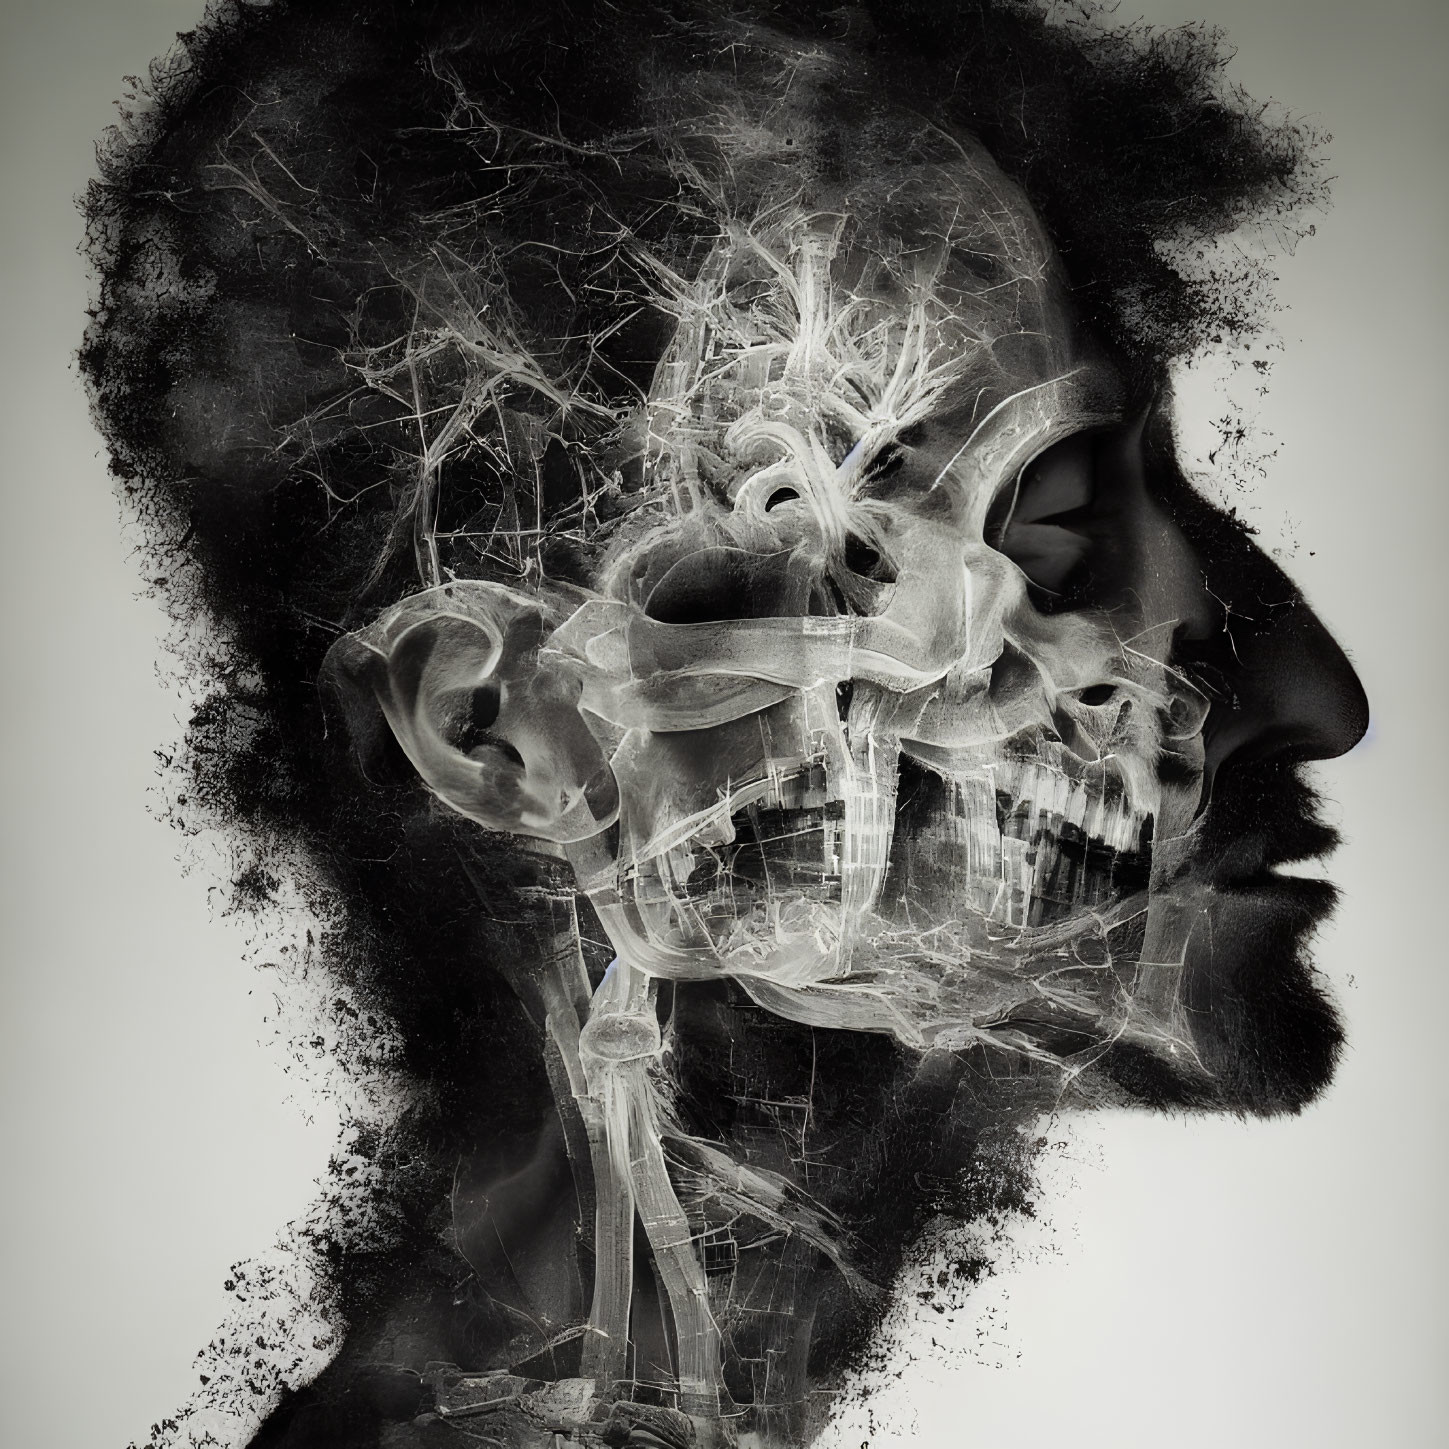 Monochrome human profile merges with intricate skull in web-like texture